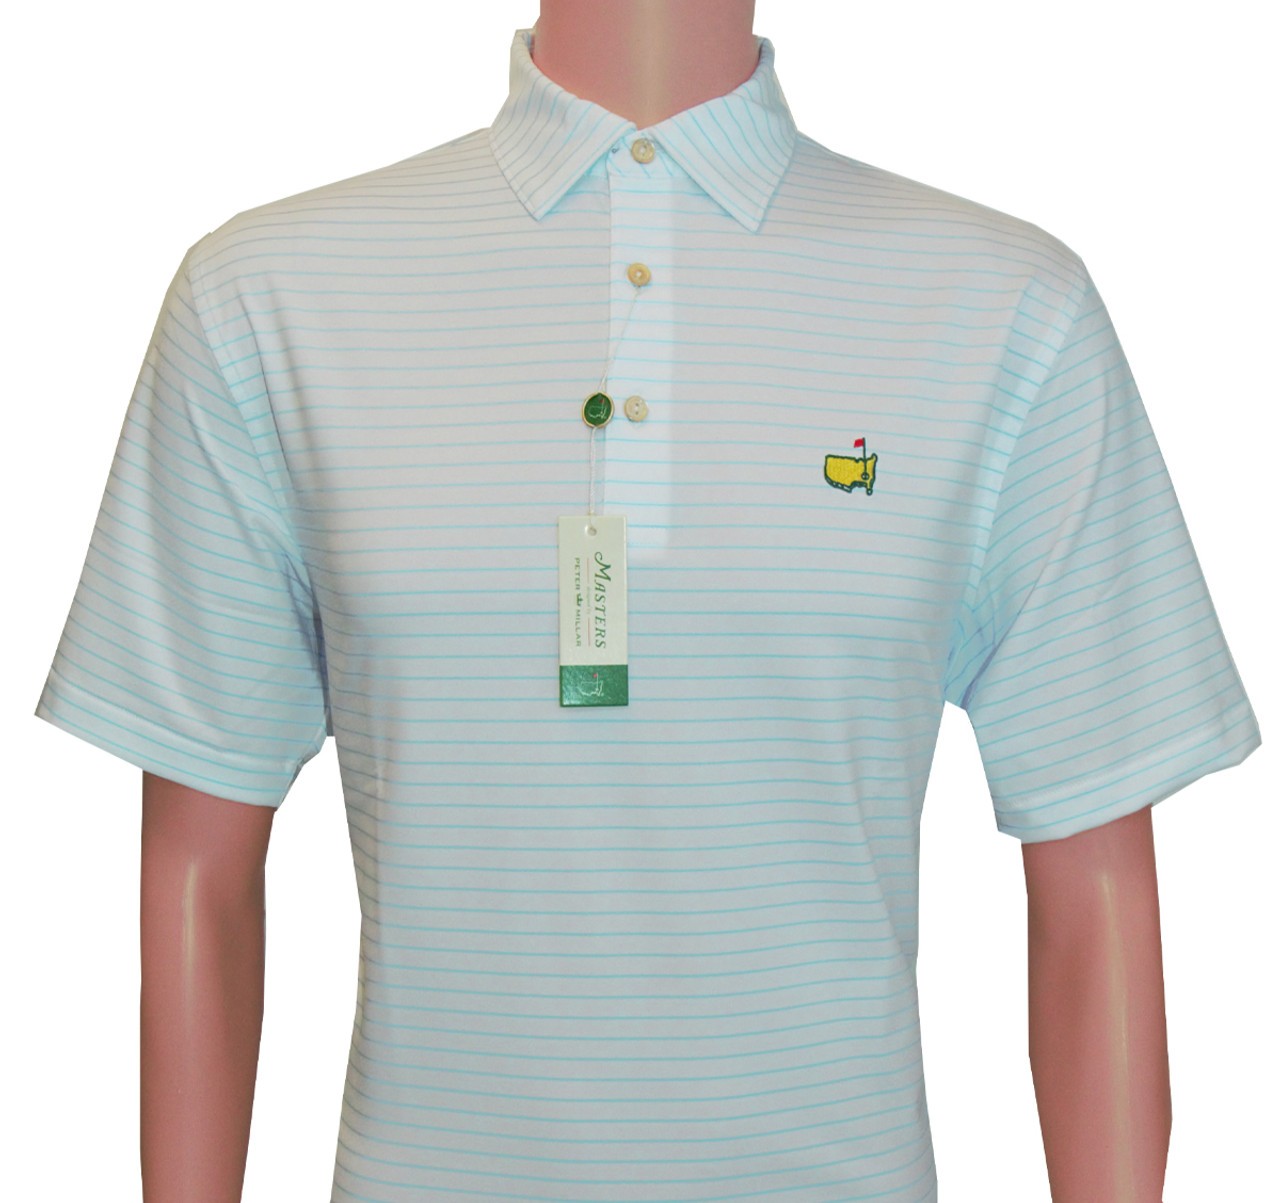 Peter Millar Masters White Performance Tech Shirt with Light Blue Stripes